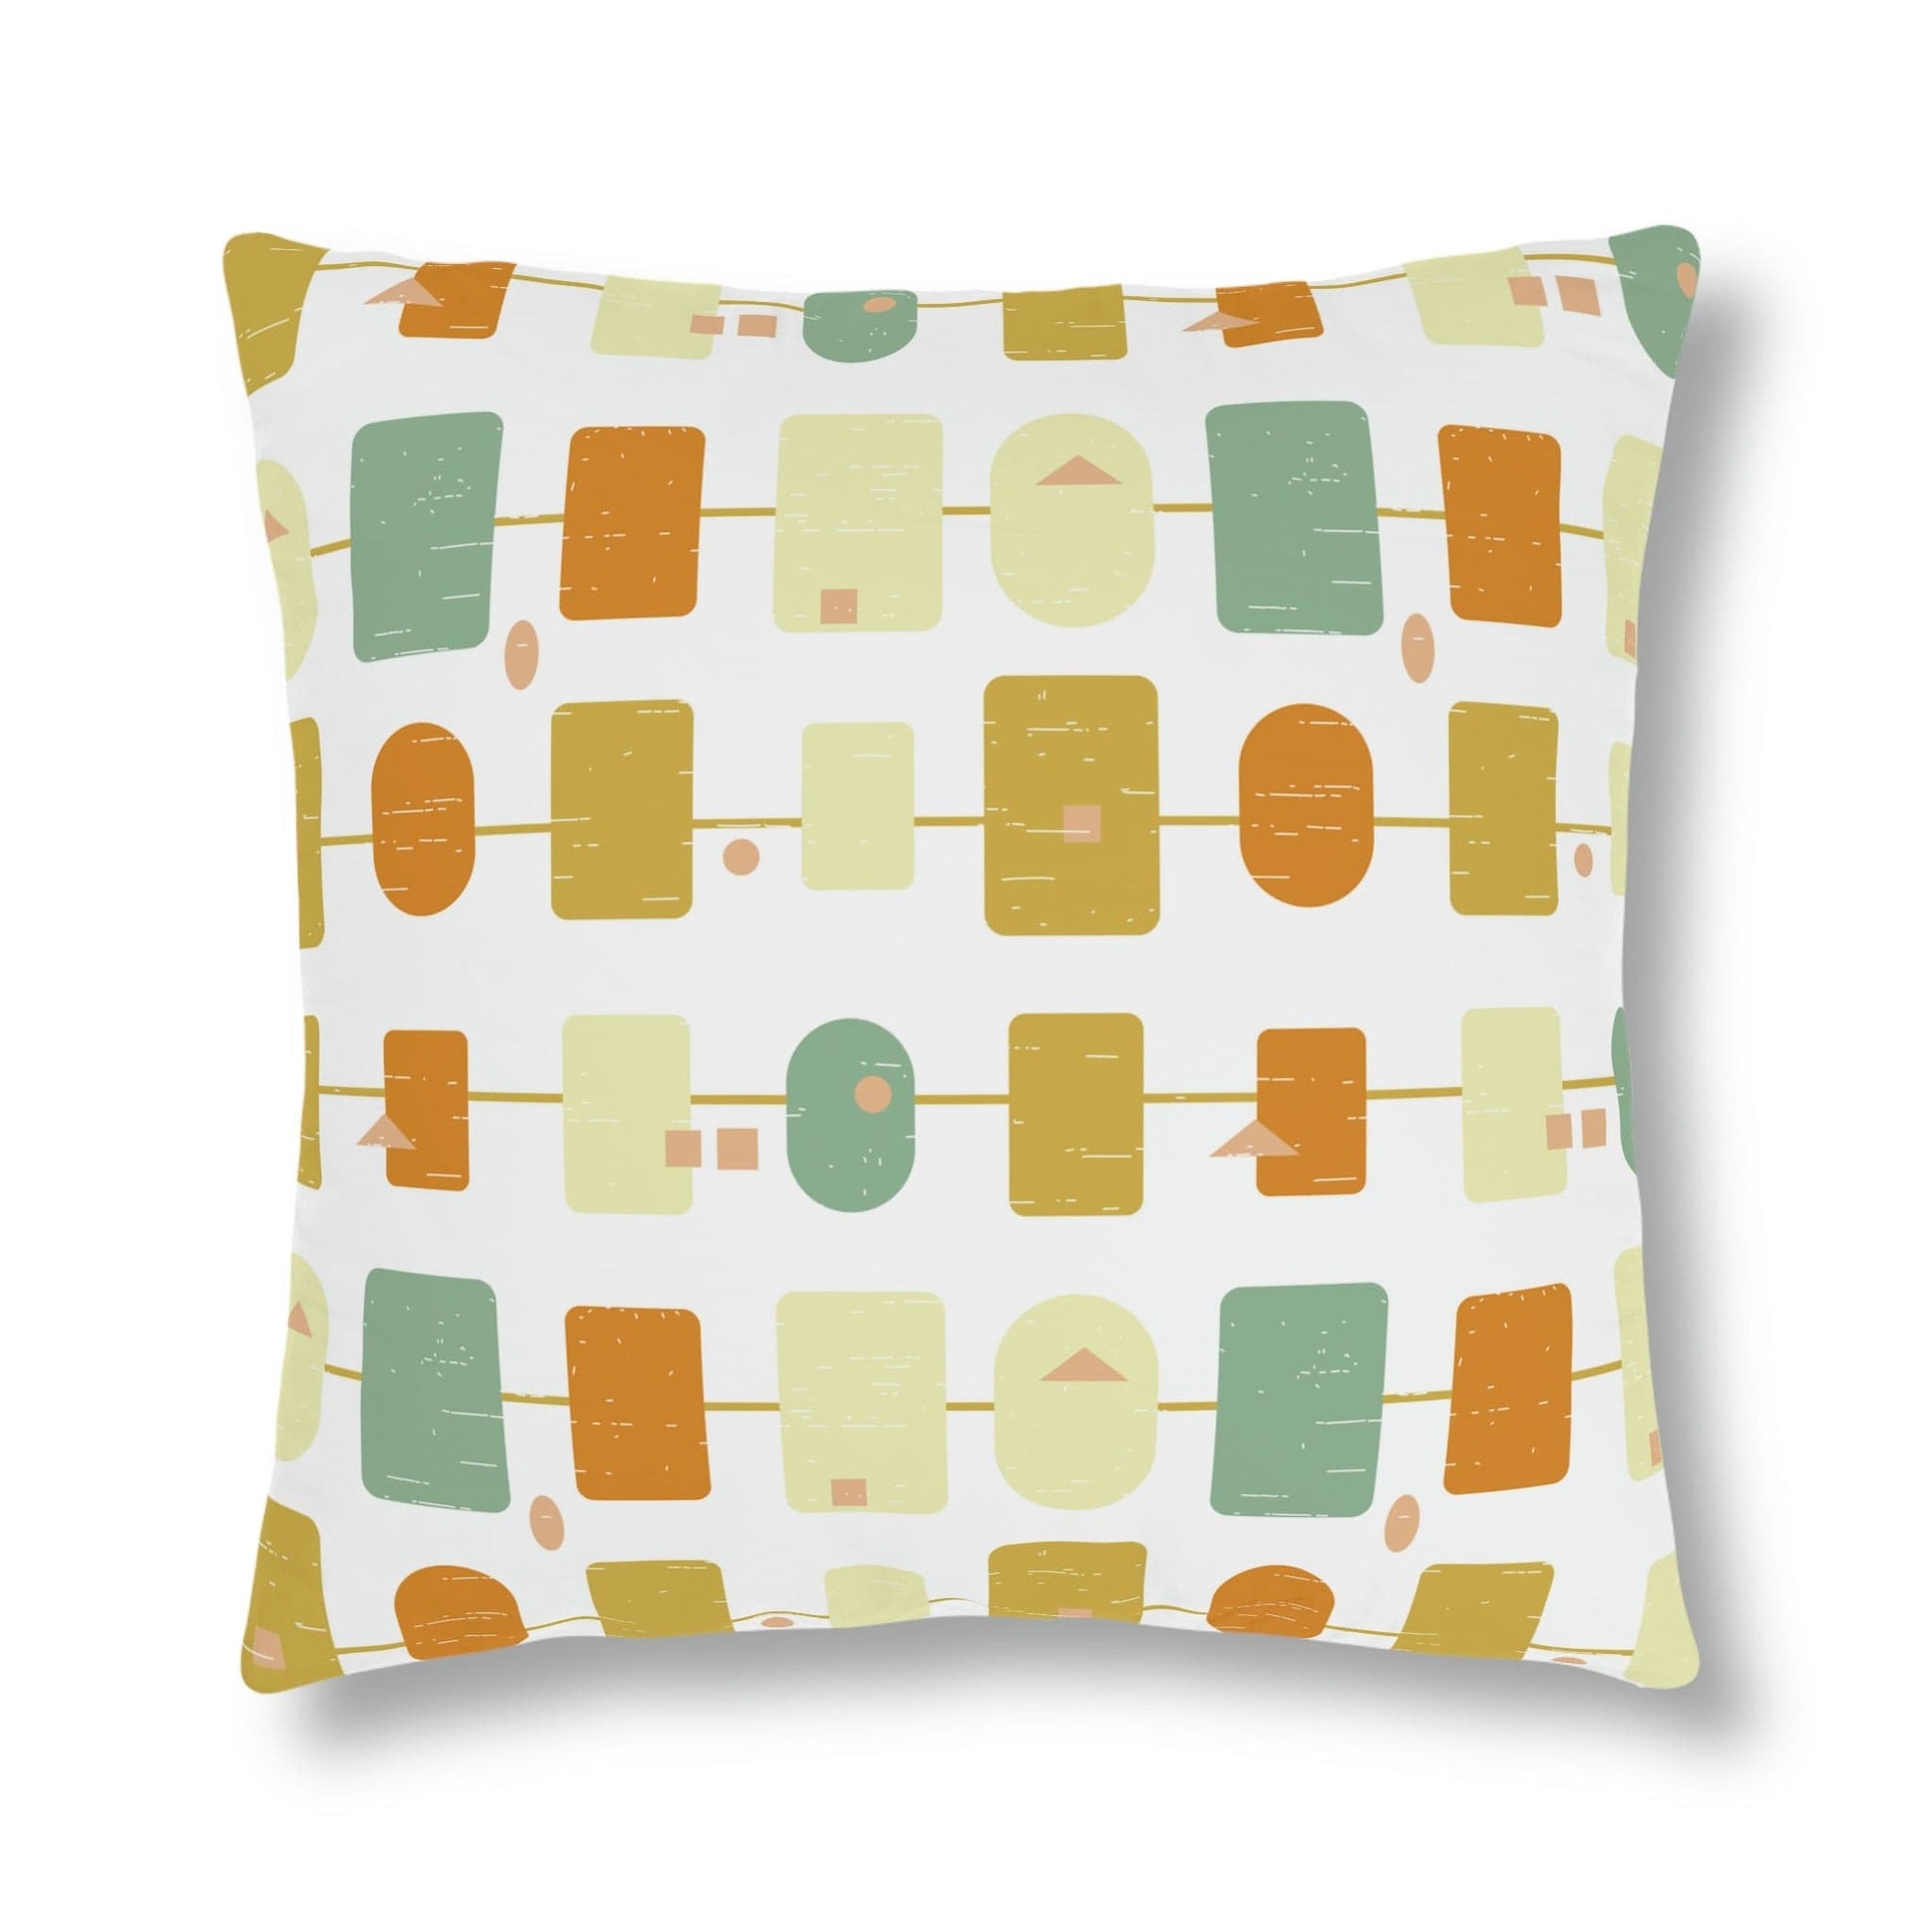 Kate McEnroe New York Outdoor Pillow in Mid Century Modern Abstract Geometric Print Outdoor Pillows 20" × 20" / Square 19595782795554474202